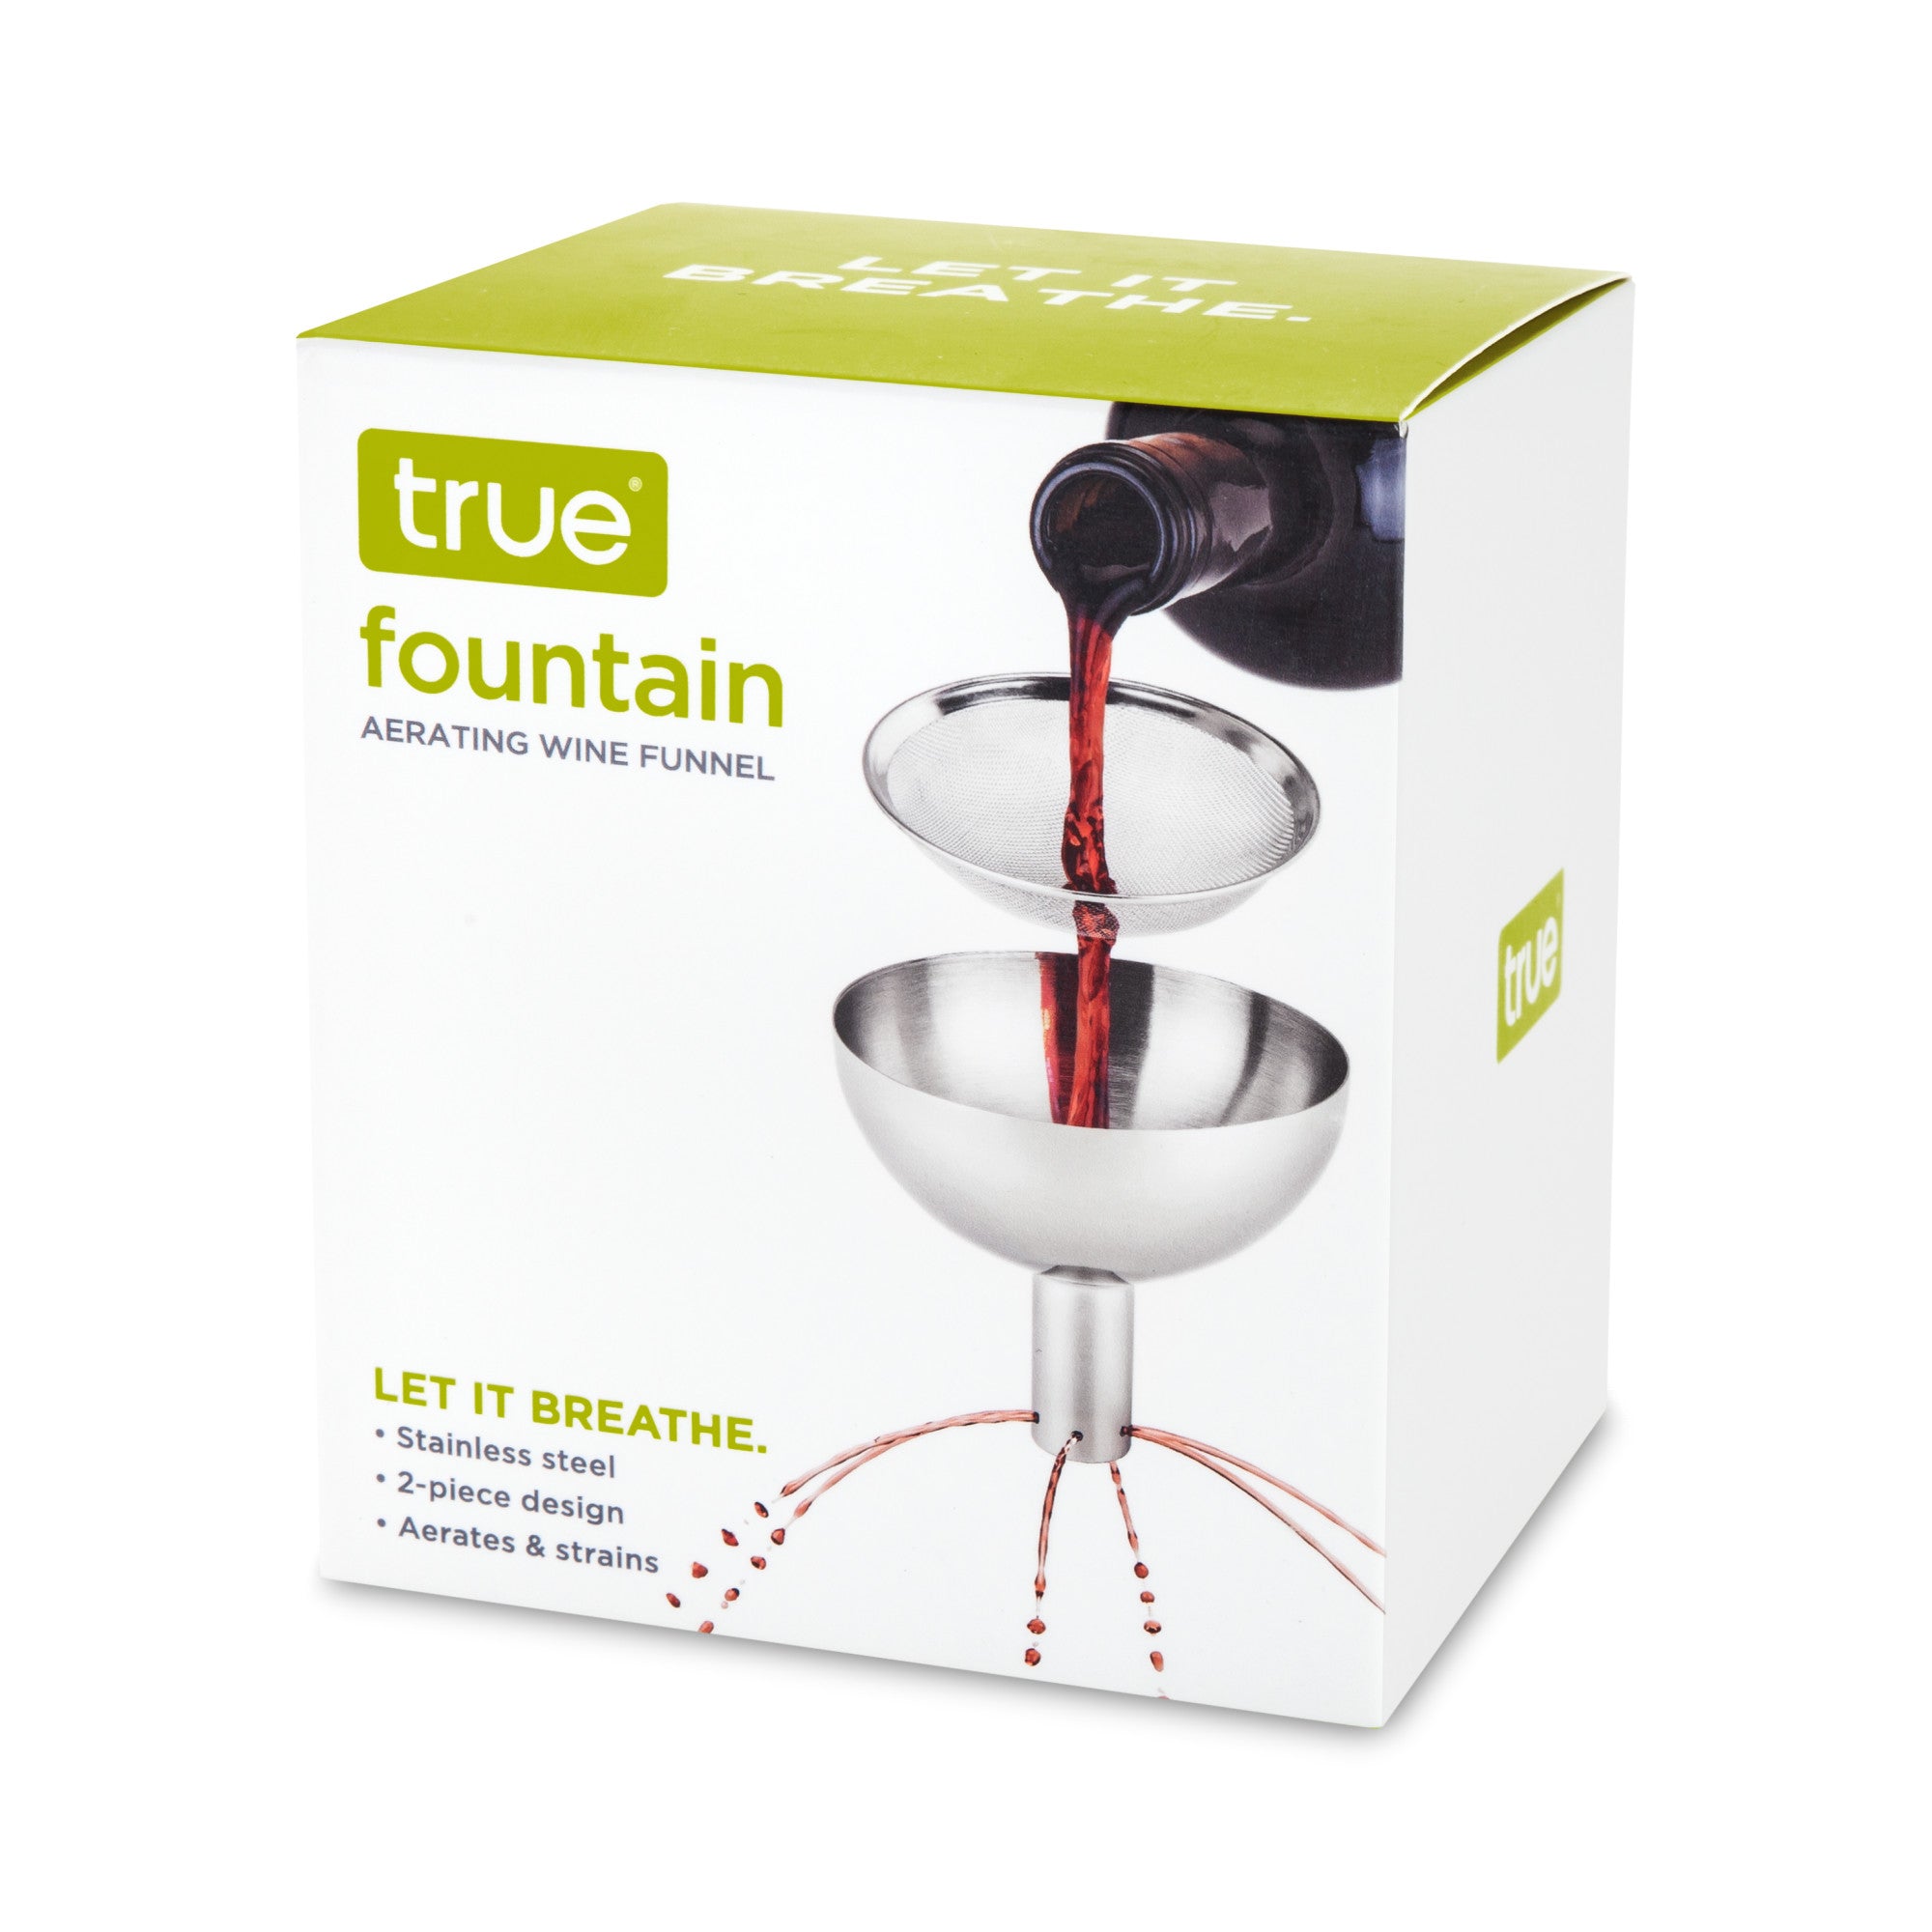 Fountain Aerating Decanter Funnel (0816)